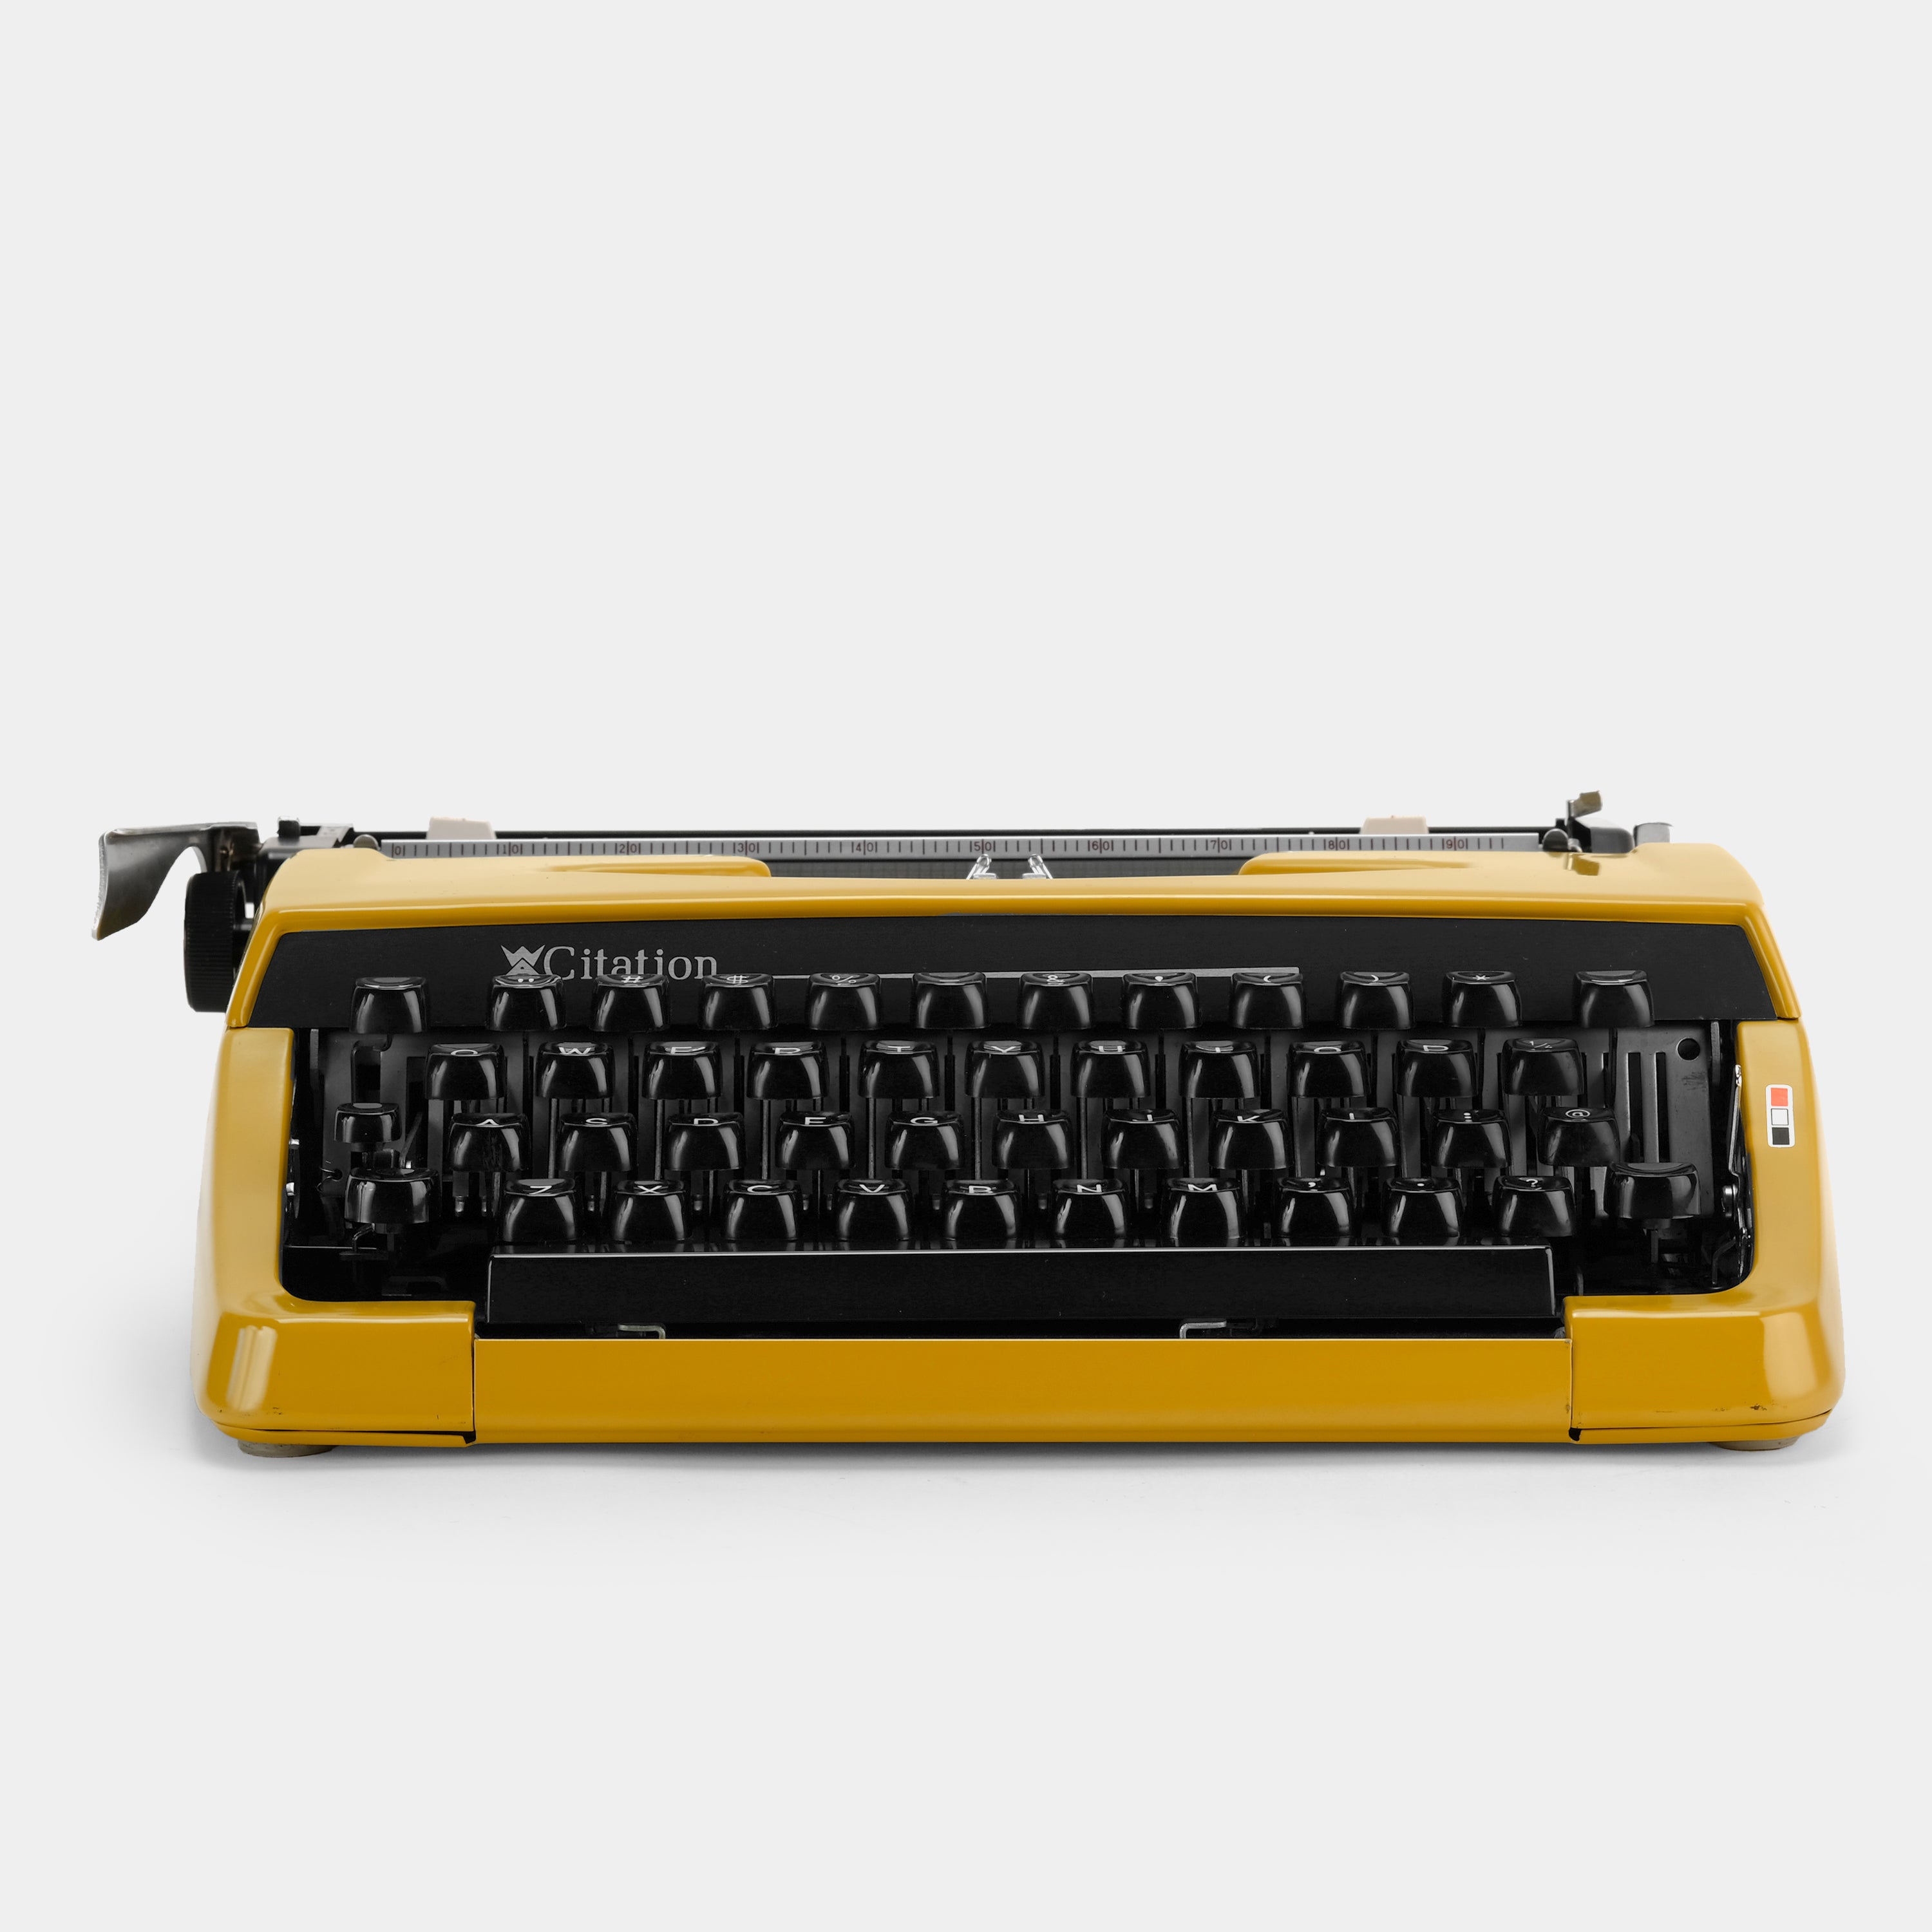 Brother Citation Yellow Manual Typewriter and Case